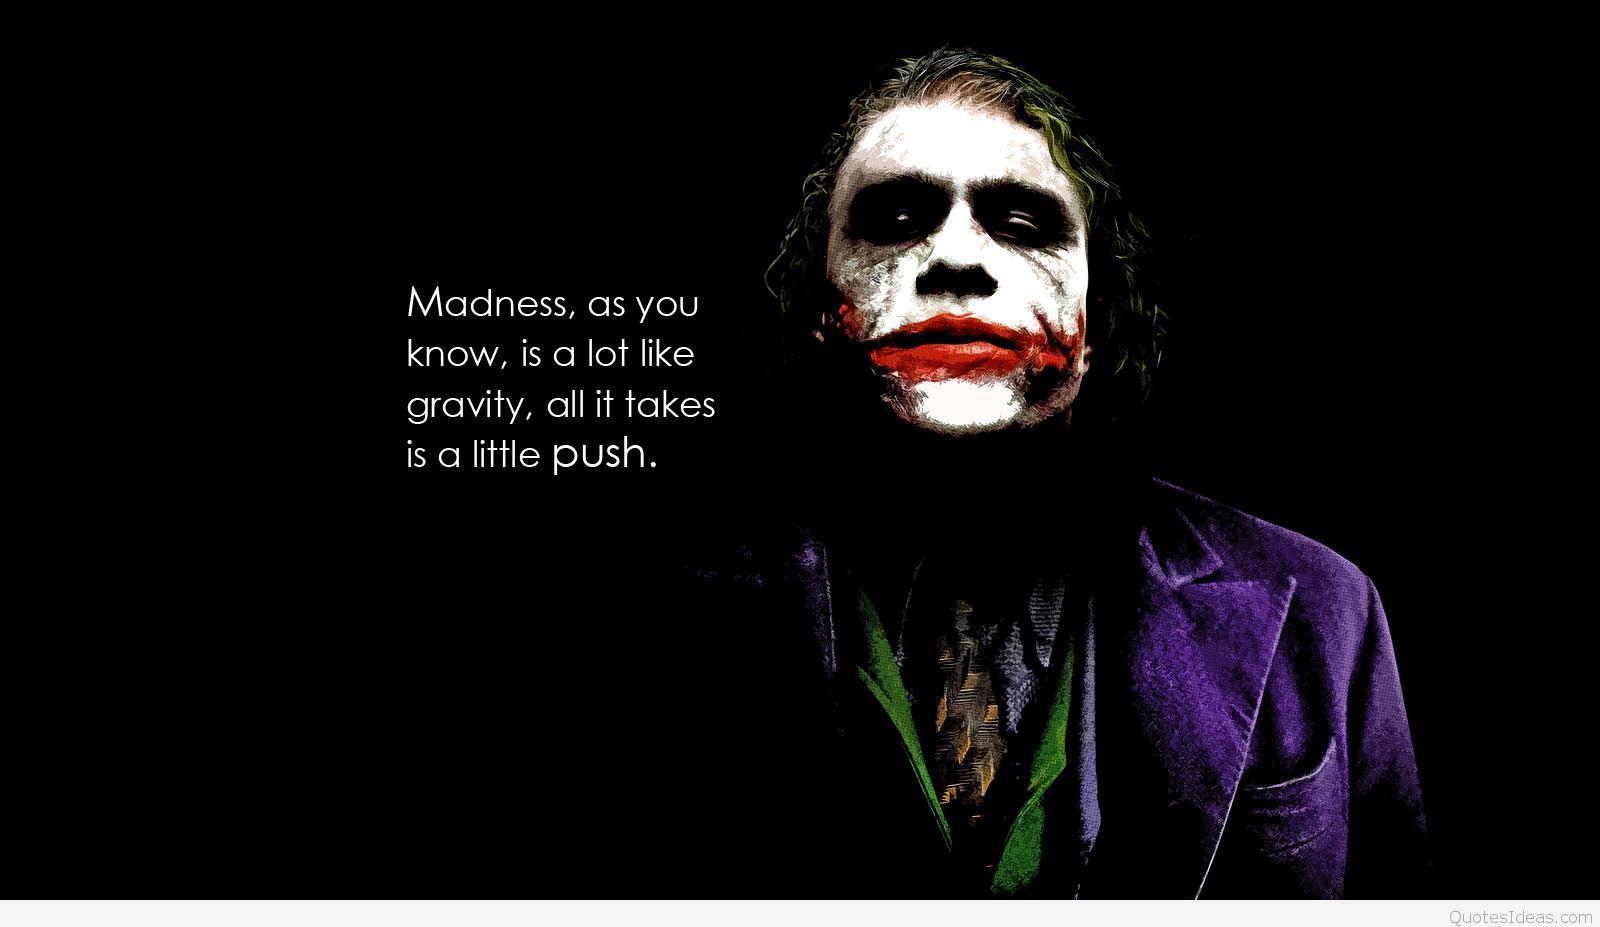 The Dark Night best quotes with background image hd